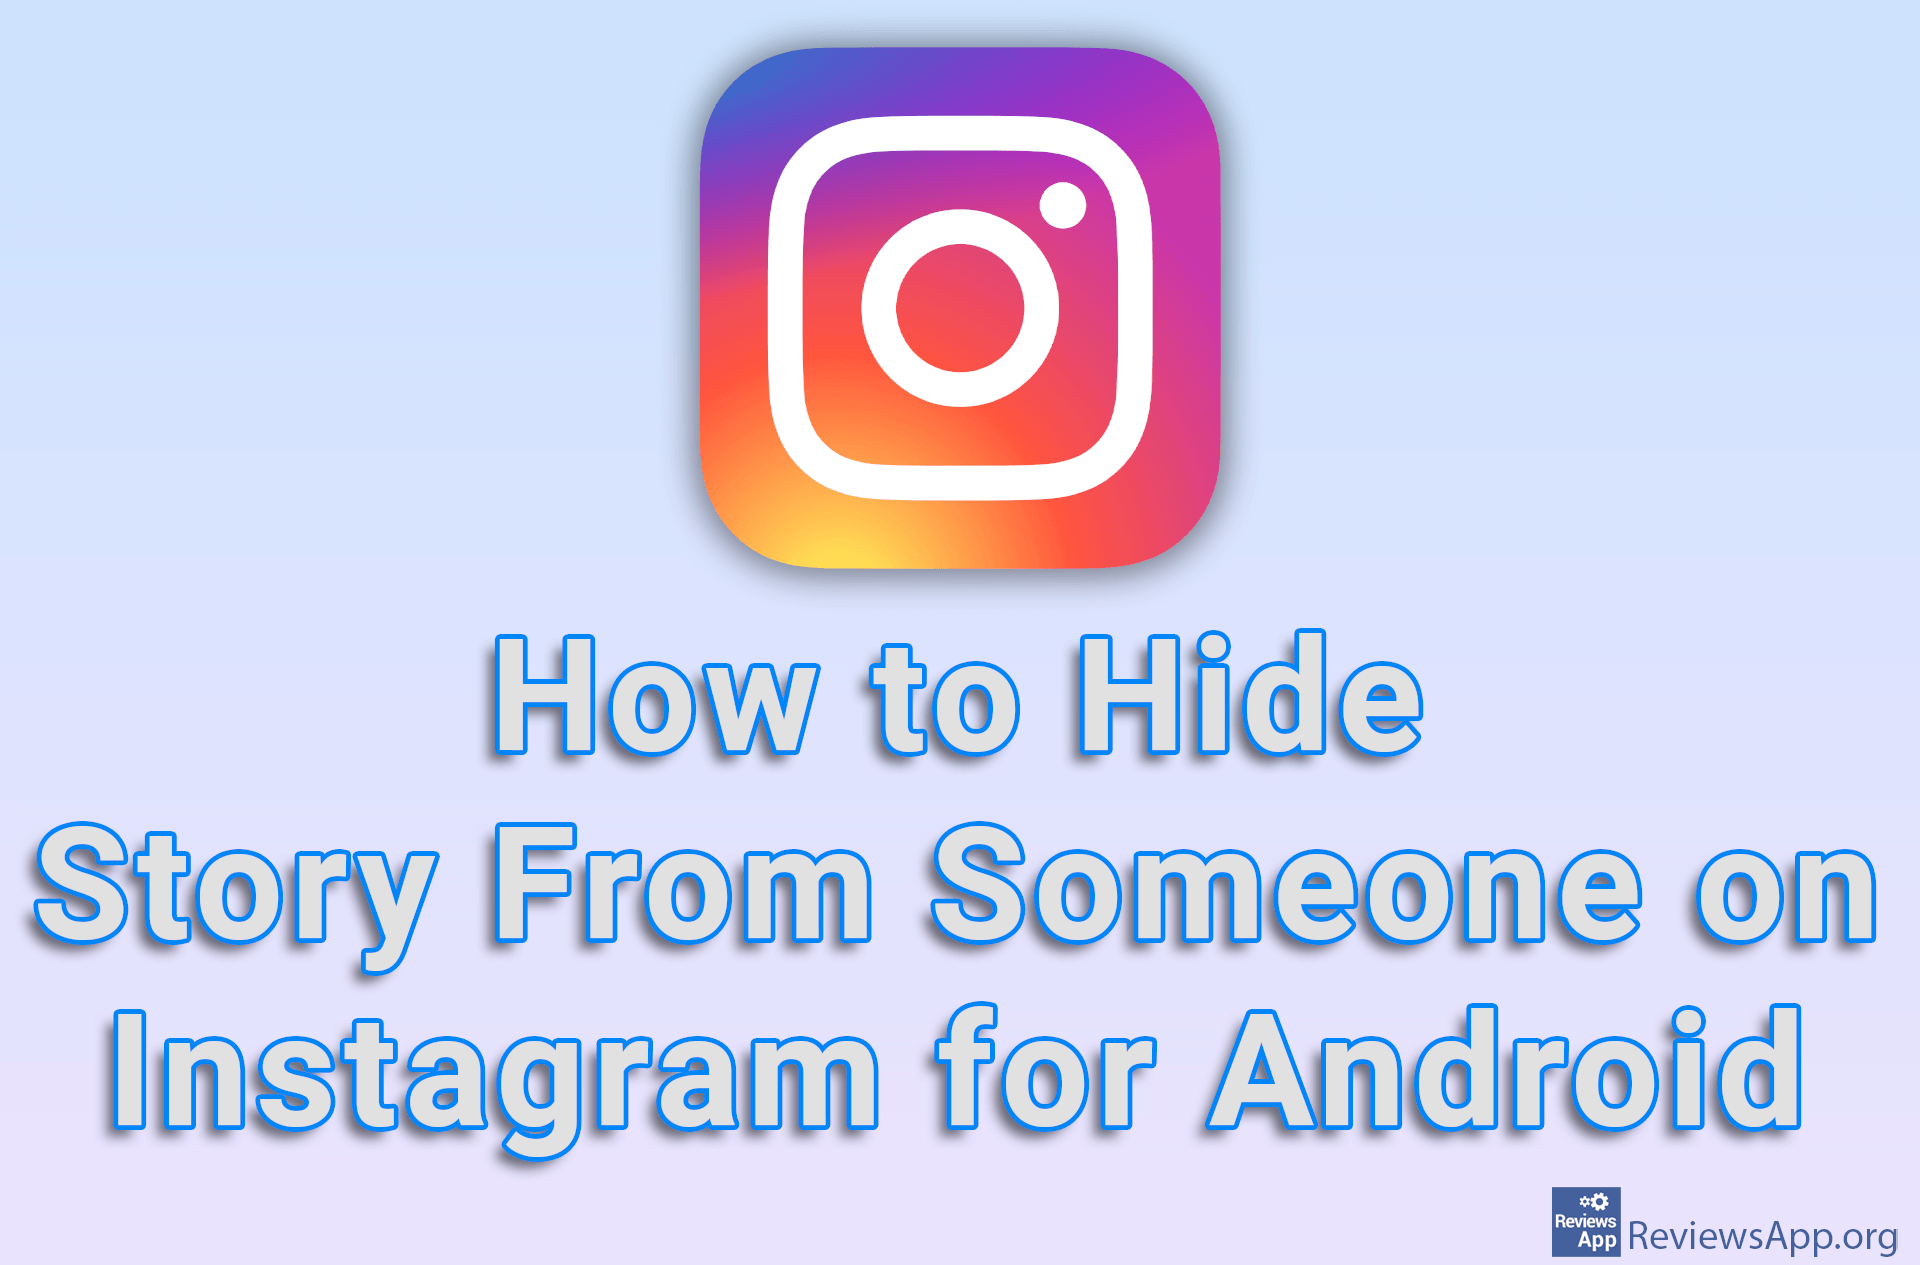 How to Hide Story From Someone on Instagram for Android